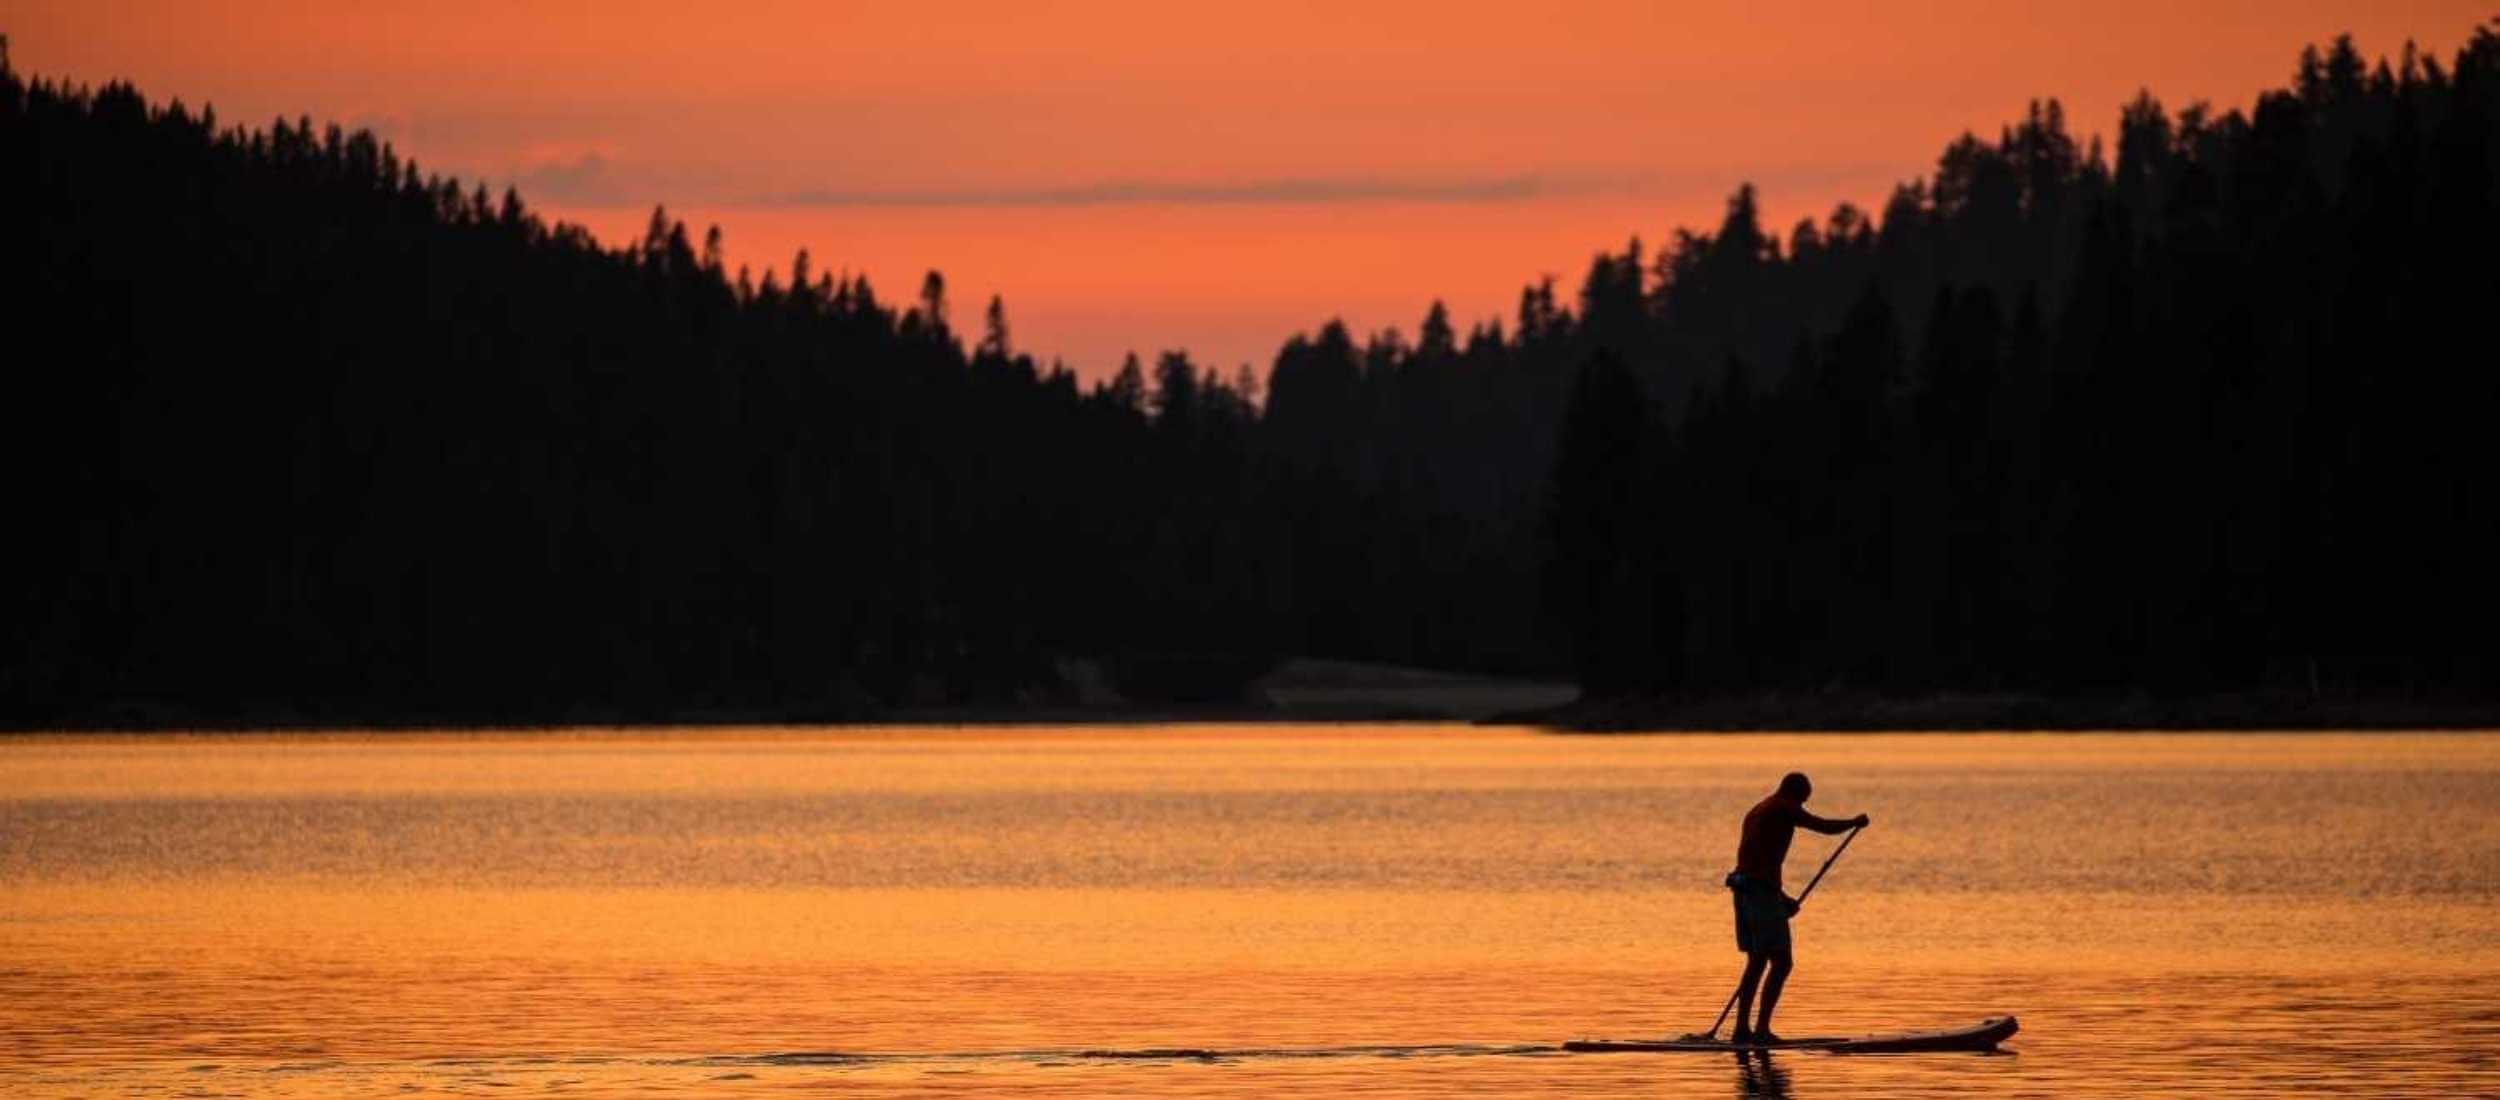 Paddle Boarding at Sunset in Northern California